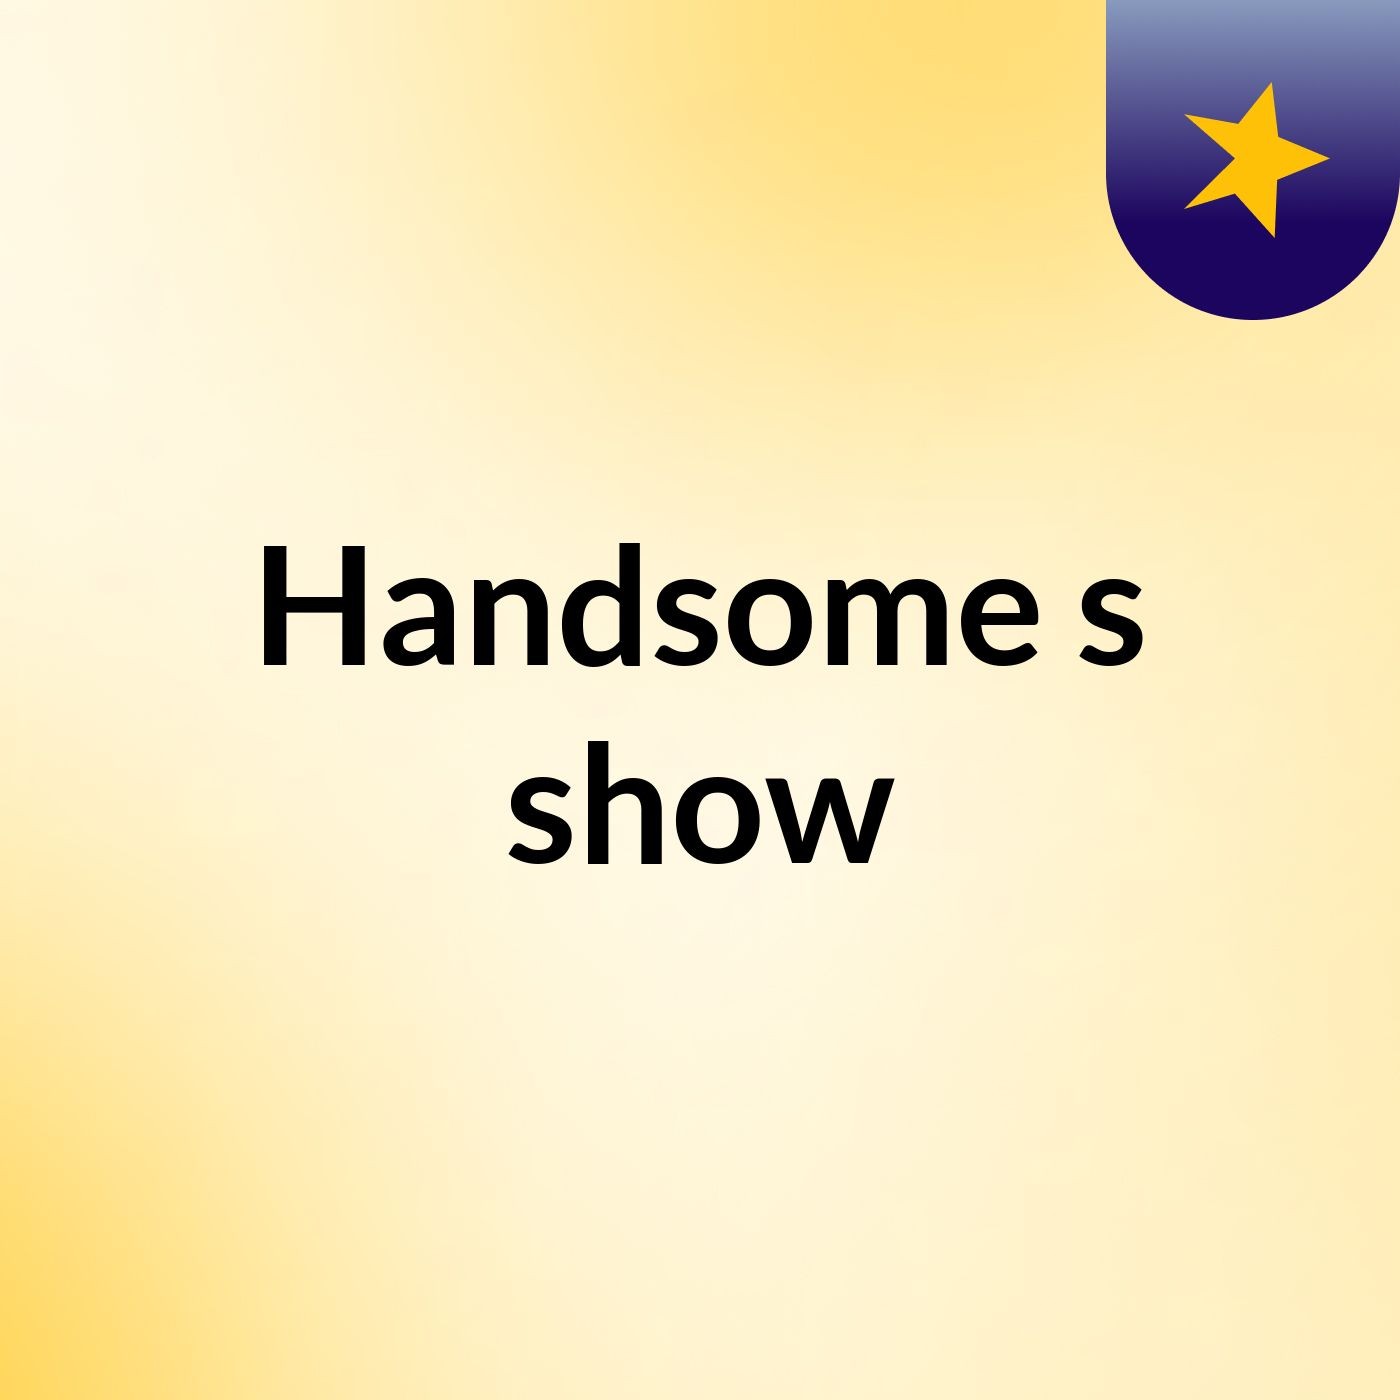 Handsome's show